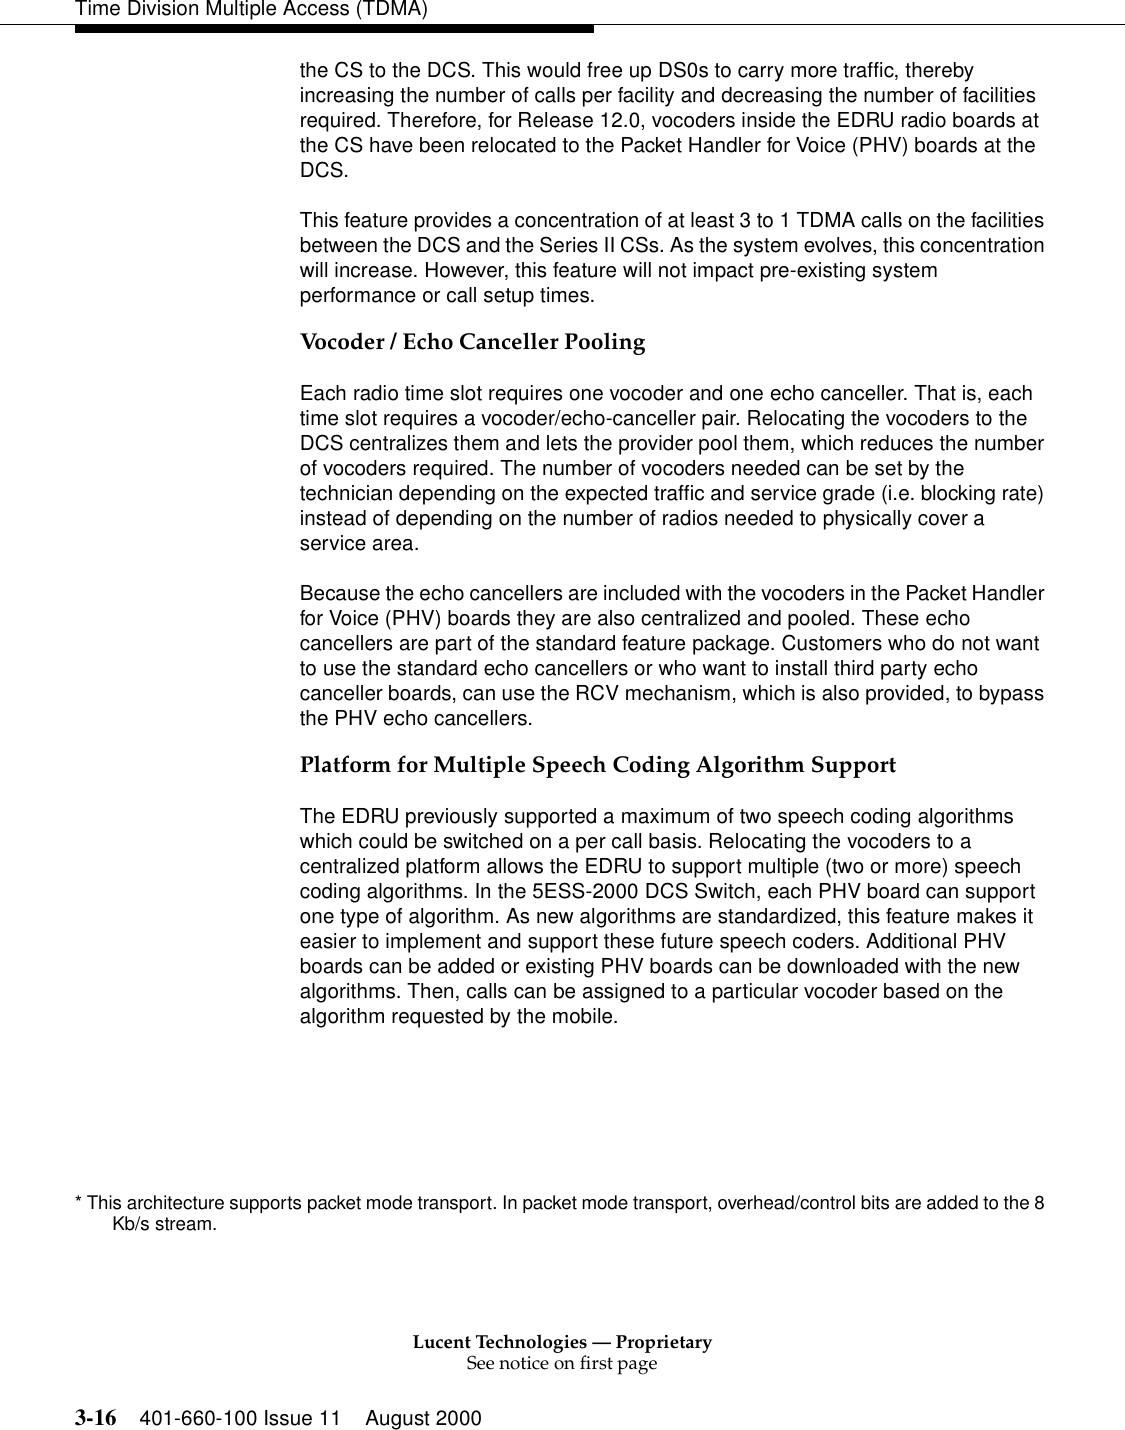 Lucent Technologies — ProprietarySee notice on first page3-16 401-660-100 Issue 11 August 2000Time Division Multiple Access (TDMA)the CS to the DCS. This would free up DS0s to carry more traffic, thereby increasing the number of calls per facility and decreasing the number of facilities required. Therefore, for Release 12.0, vocoders inside the EDRU radio boards at the CS have been relocated to the Packet Handler for Voice (PHV) boards at the DCS. This feature provides a concentration of at least 3 to 1 TDMA calls on the facilities between the DCS and the Series II CSs. As the system evolves, this concentration will increase. However, this feature will not impact pre-existing system performance or call setup times. Vocoder / Echo Canceller PoolingEach radio time slot requires one vocoder and one echo canceller. That is, each time slot requires a vocoder/echo-canceller pair. Relocating the vocoders to the DCS centralizes them and lets the provider pool them, which reduces the number of vocoders required. The number of vocoders needed can be set by the technician depending on the expected traffic and service grade (i.e. blocking rate) instead of depending on the number of radios needed to physically cover a service area. Because the echo cancellers are included with the vocoders in the Packet Handler for Voice (PHV) boards they are also centralized and pooled. These echo cancellers are part of the standard feature package. Customers who do not want to use the standard echo cancellers or who want to install third party echo canceller boards, can use the RCV mechanism, which is also provided, to bypass the PHV echo cancellers. Platform for Multiple Speech Coding Algorithm SupportThe EDRU previously supported a maximum of two speech coding algorithms which could be switched on a per call basis. Relocating the vocoders to a centralized platform allows the EDRU to support multiple (two or more) speech coding algorithms. In the 5ESS-2000 DCS Switch, each PHV board can support one type of algorithm. As new algorithms are standardized, this feature makes it easier to implement and support these future speech coders. Additional PHV boards can be added or existing PHV boards can be downloaded with the new algorithms. Then, calls can be assigned to a particular vocoder based on the algorithm requested by the mobile.* This architecture supports packet mode transport. In packet mode transport, overhead/control bits are added to the 8 Kb/s stream. 